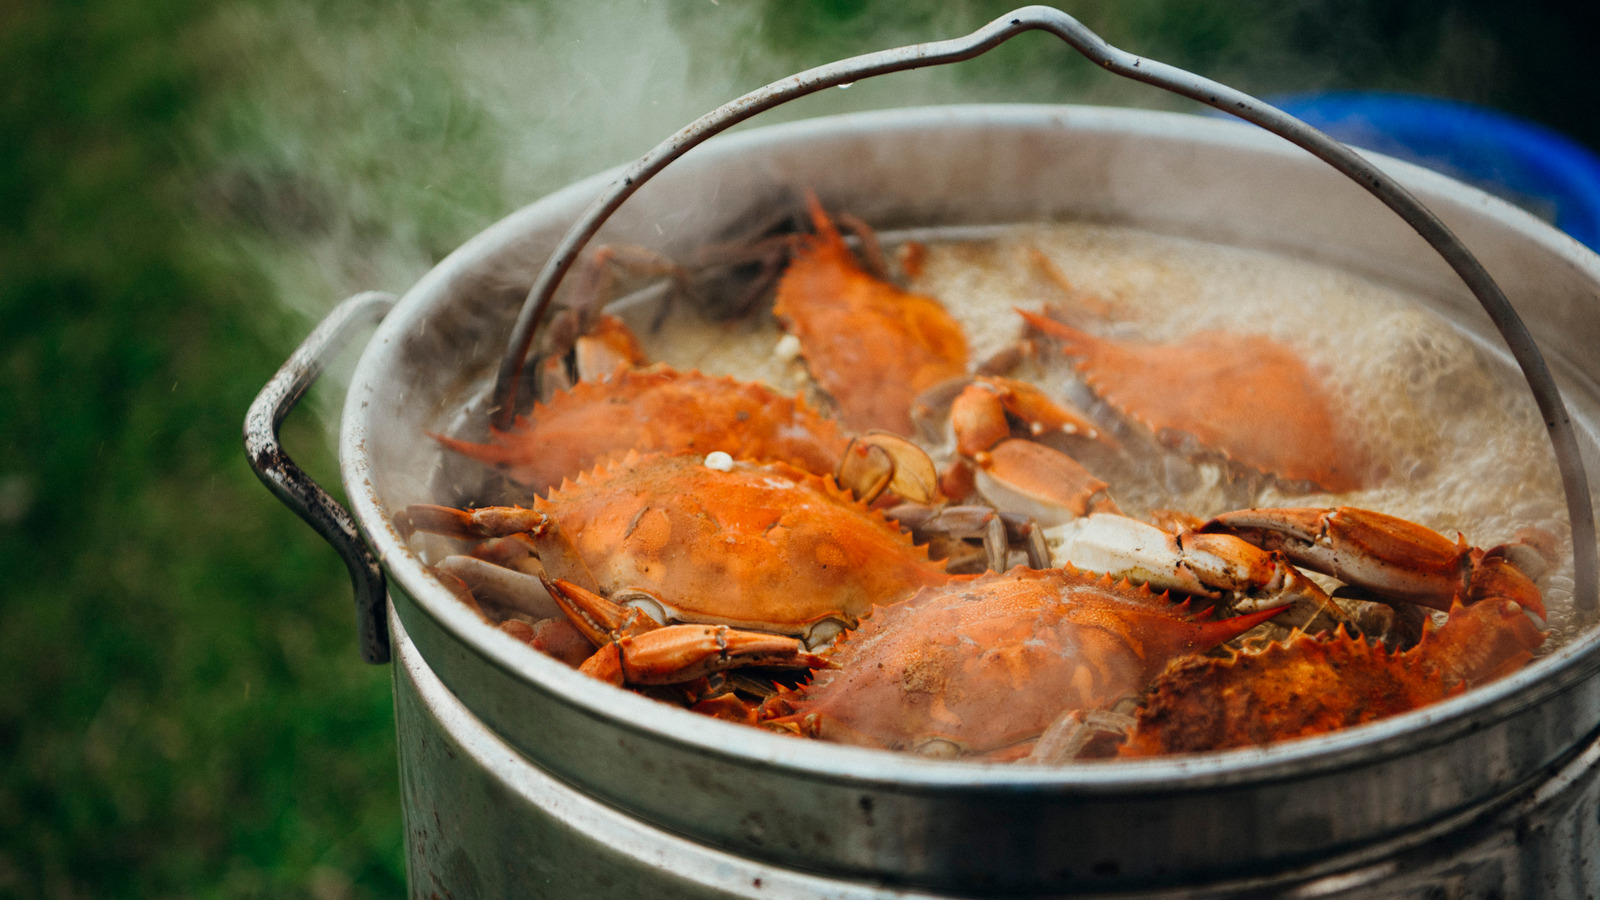 You May Want To Think Twice Before You Boil Crab. Here's Why